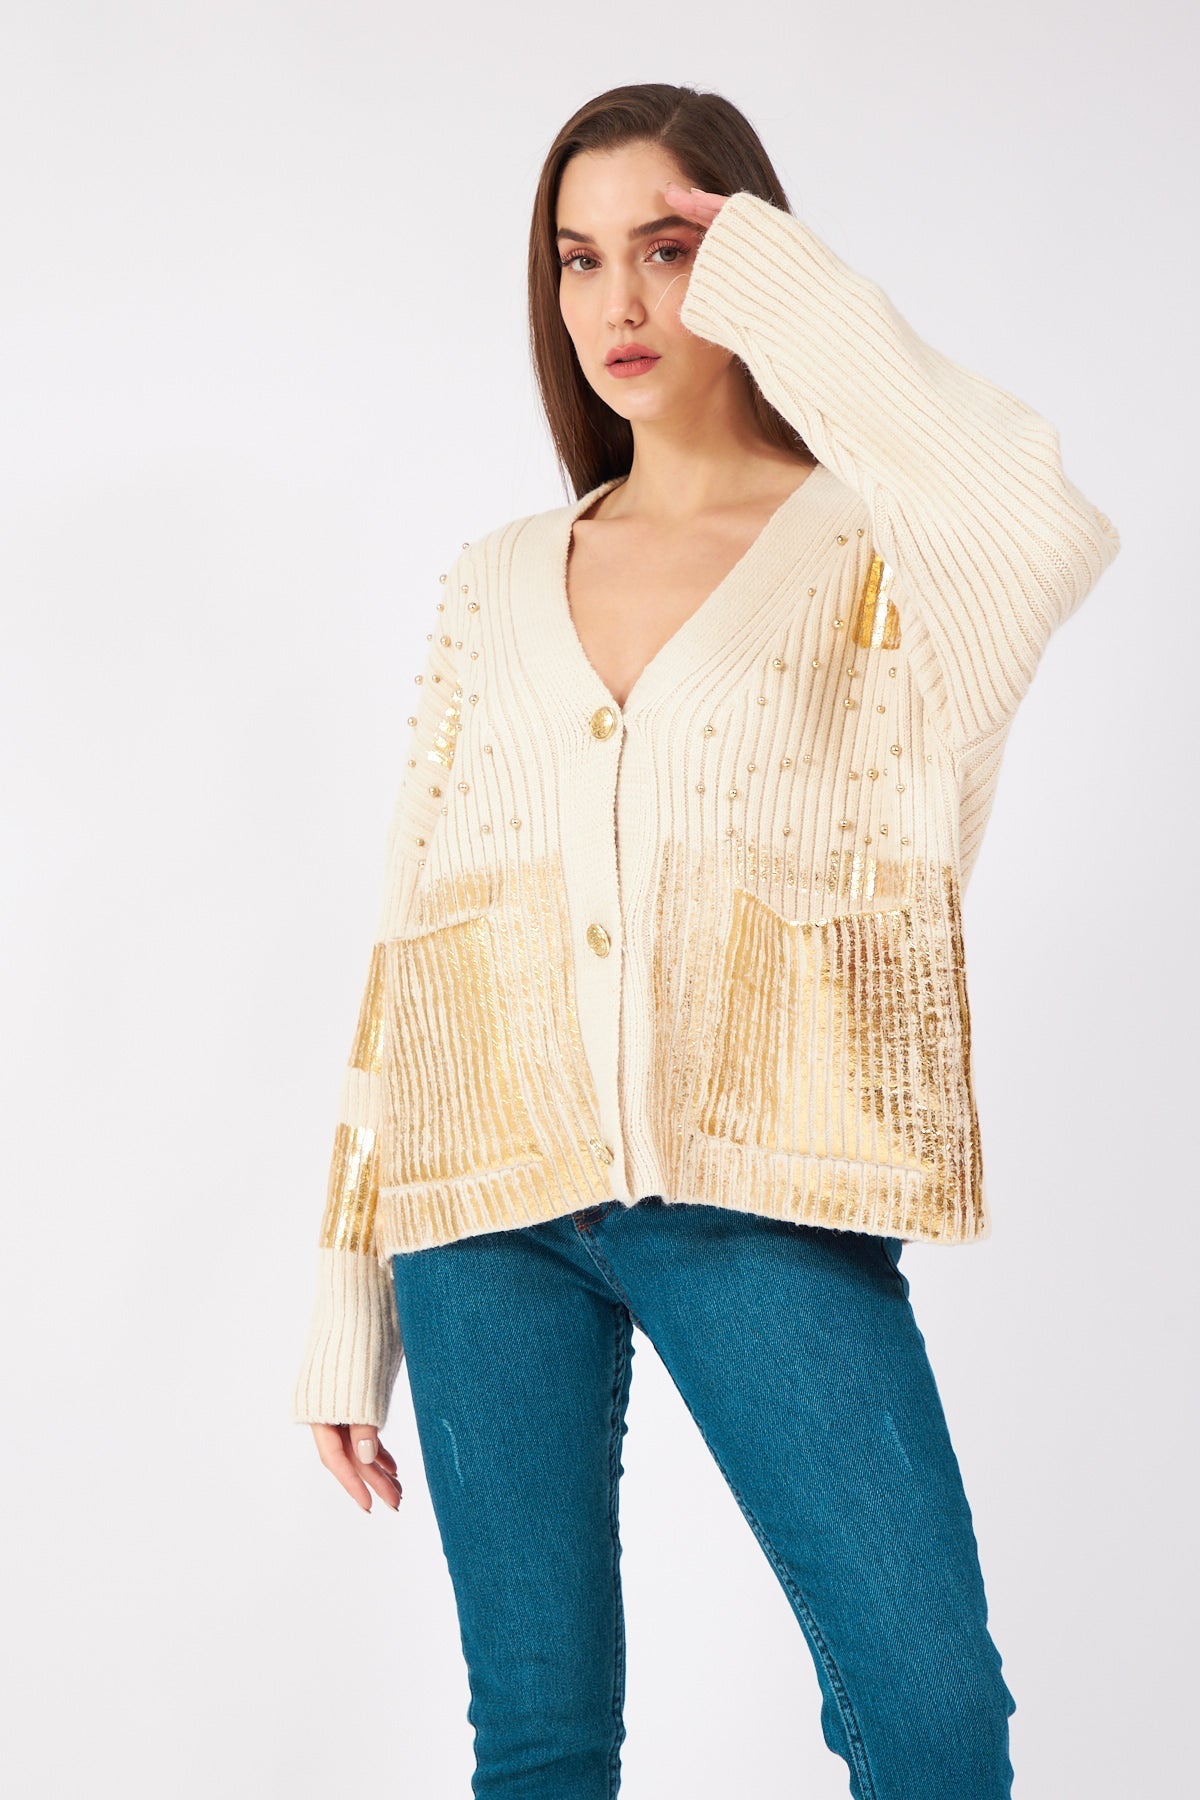 Off White With Gold Pearl Cardigan - Lebbse